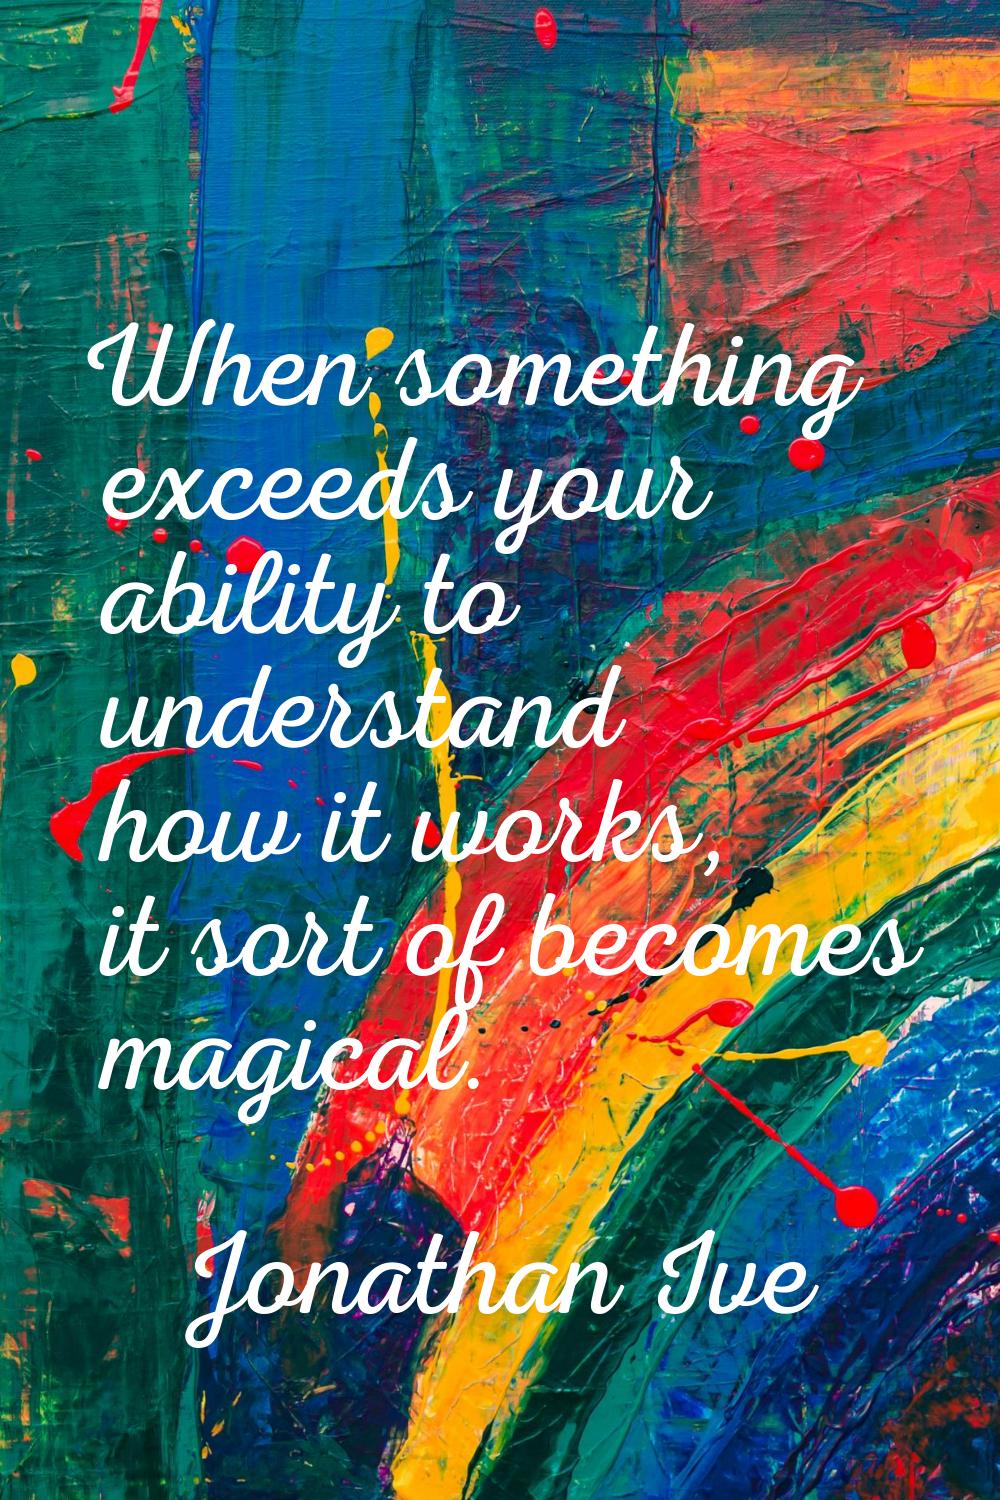 When something exceeds your ability to understand how it works, it sort of becomes magical.